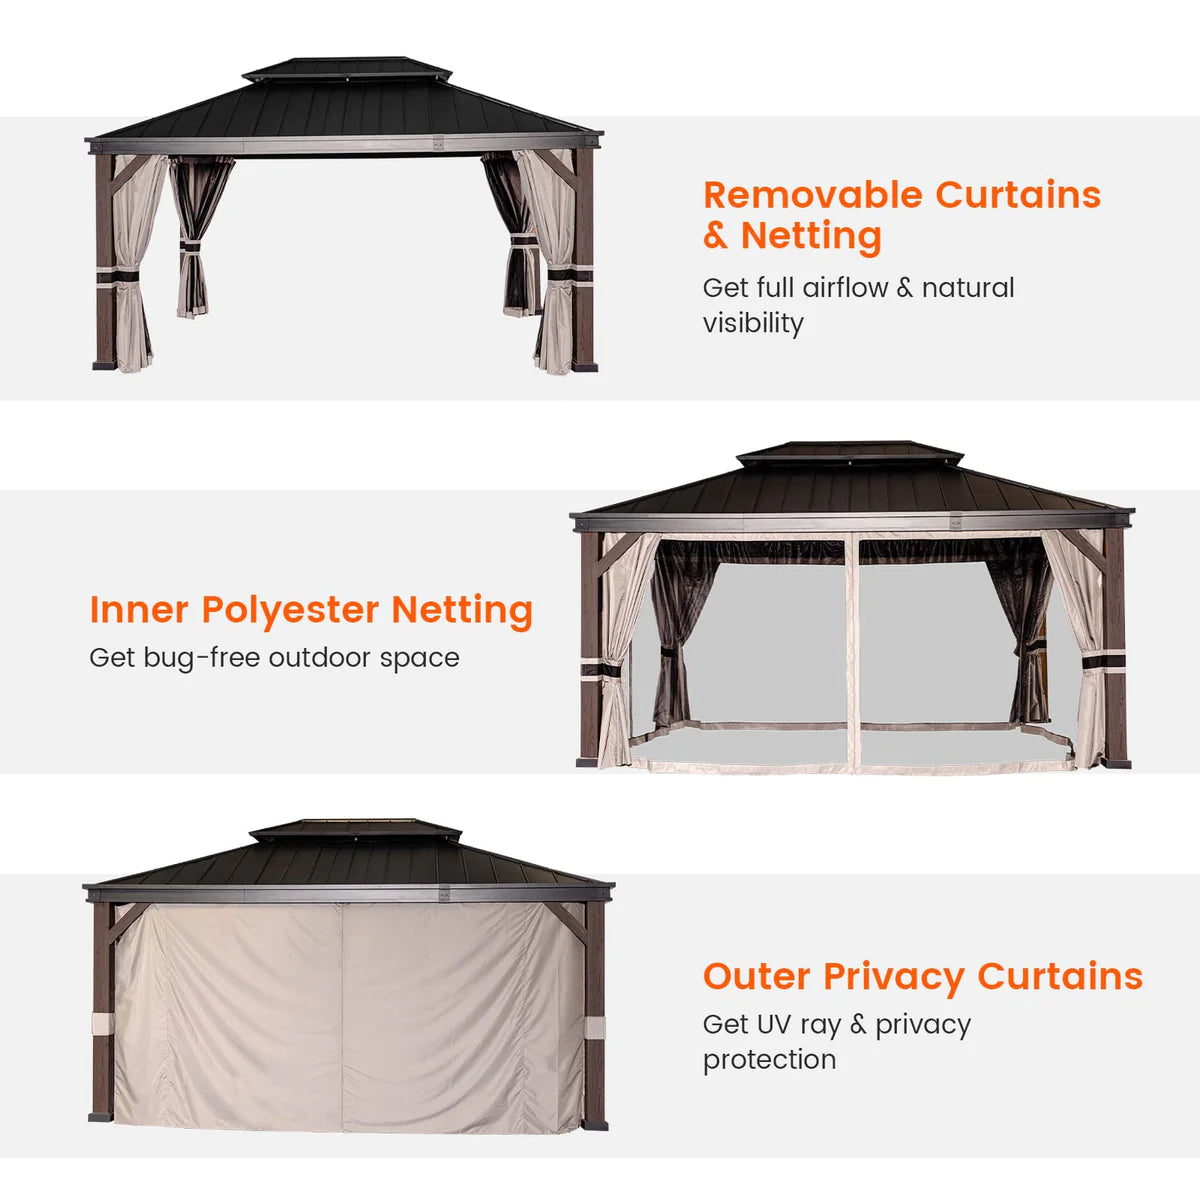 12' x 16' Alps Hardtop Gazebo with Double Roof, Aluminum Frame, Curtains & Netting